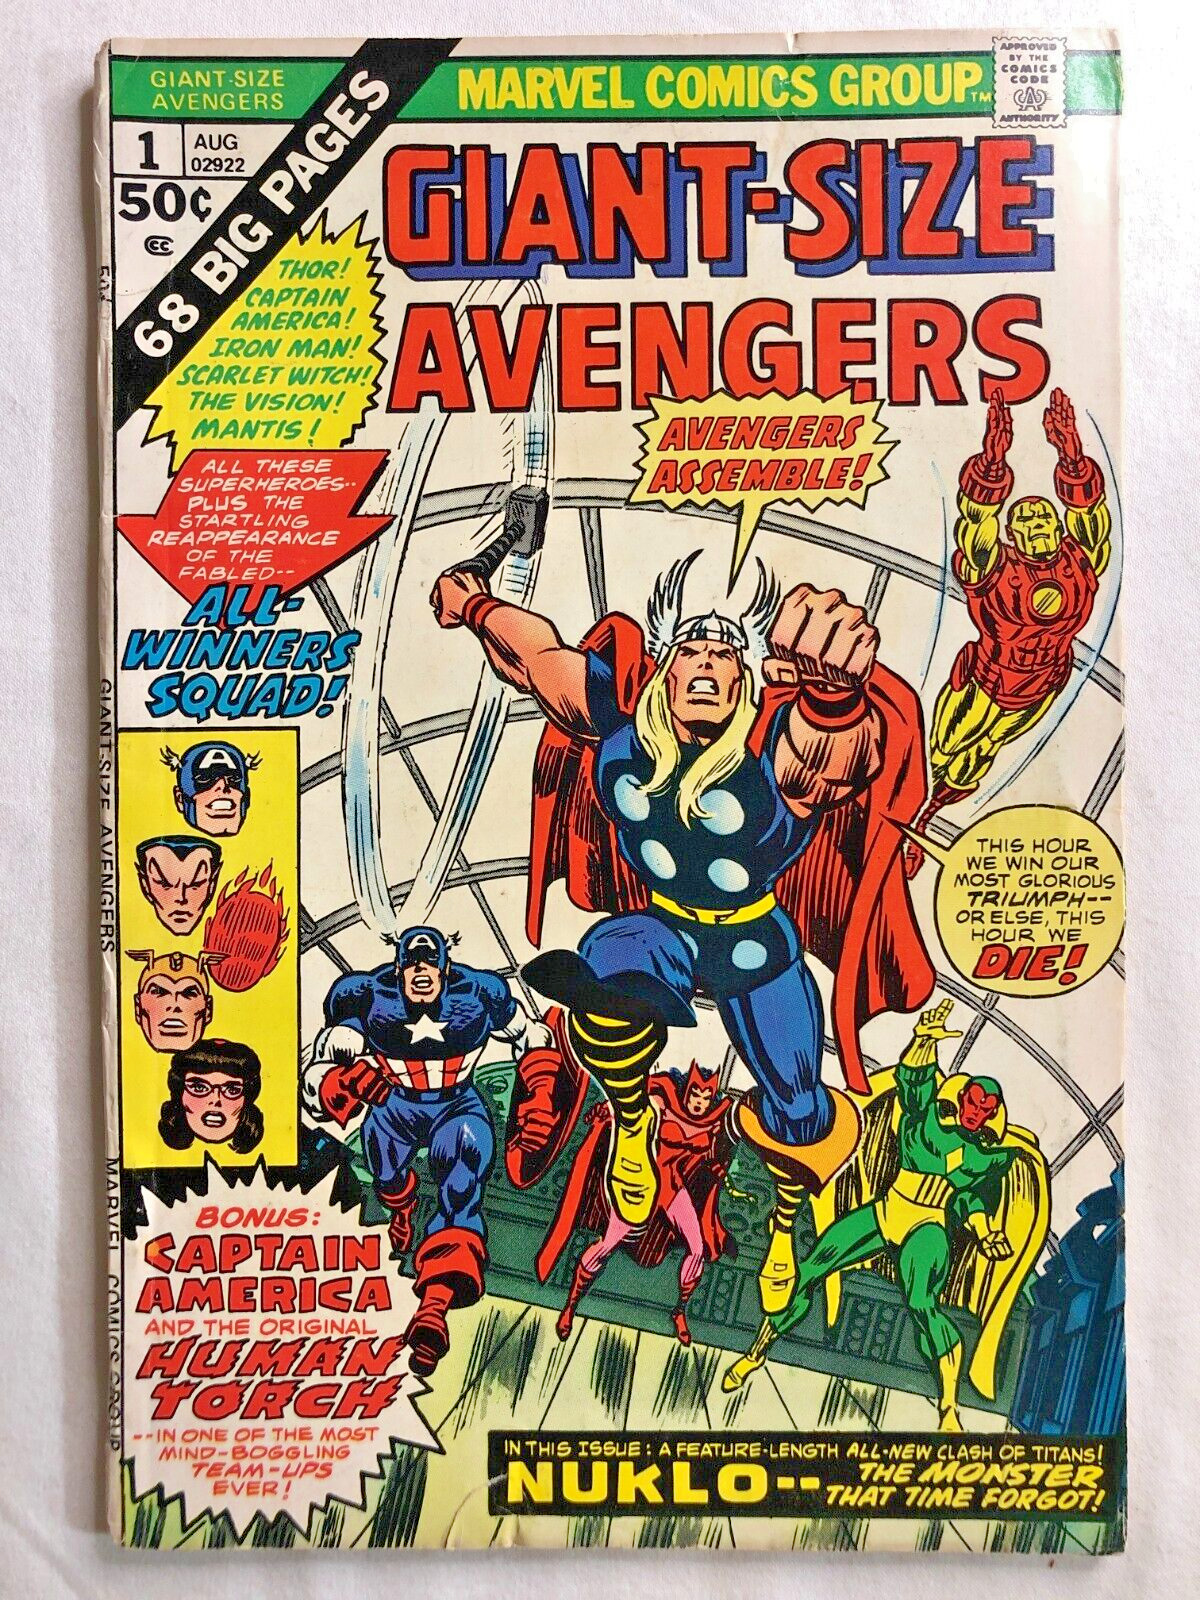 Giant-Size Avengers #1 Vintage Silver Age Marvel Comics Nice Condition